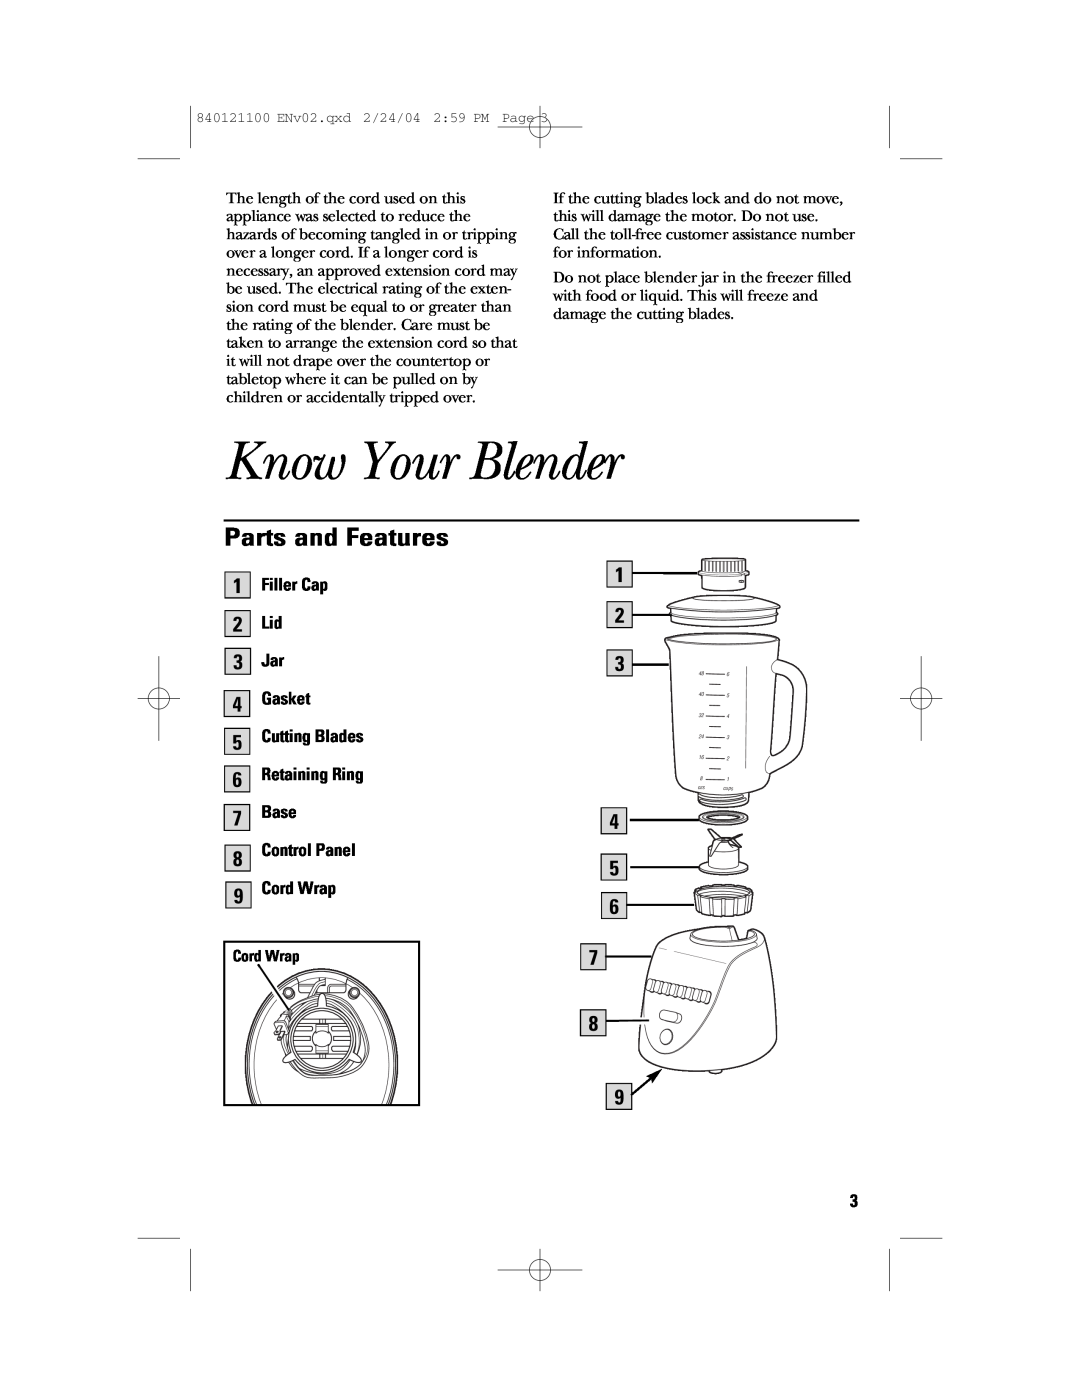 GE 168986 manual Know Your Blender, Parts and Features, Filler Cap 2 Lid 3 Jar 4 Gasket 5 Cutting Blades 6 Retaining Ring 